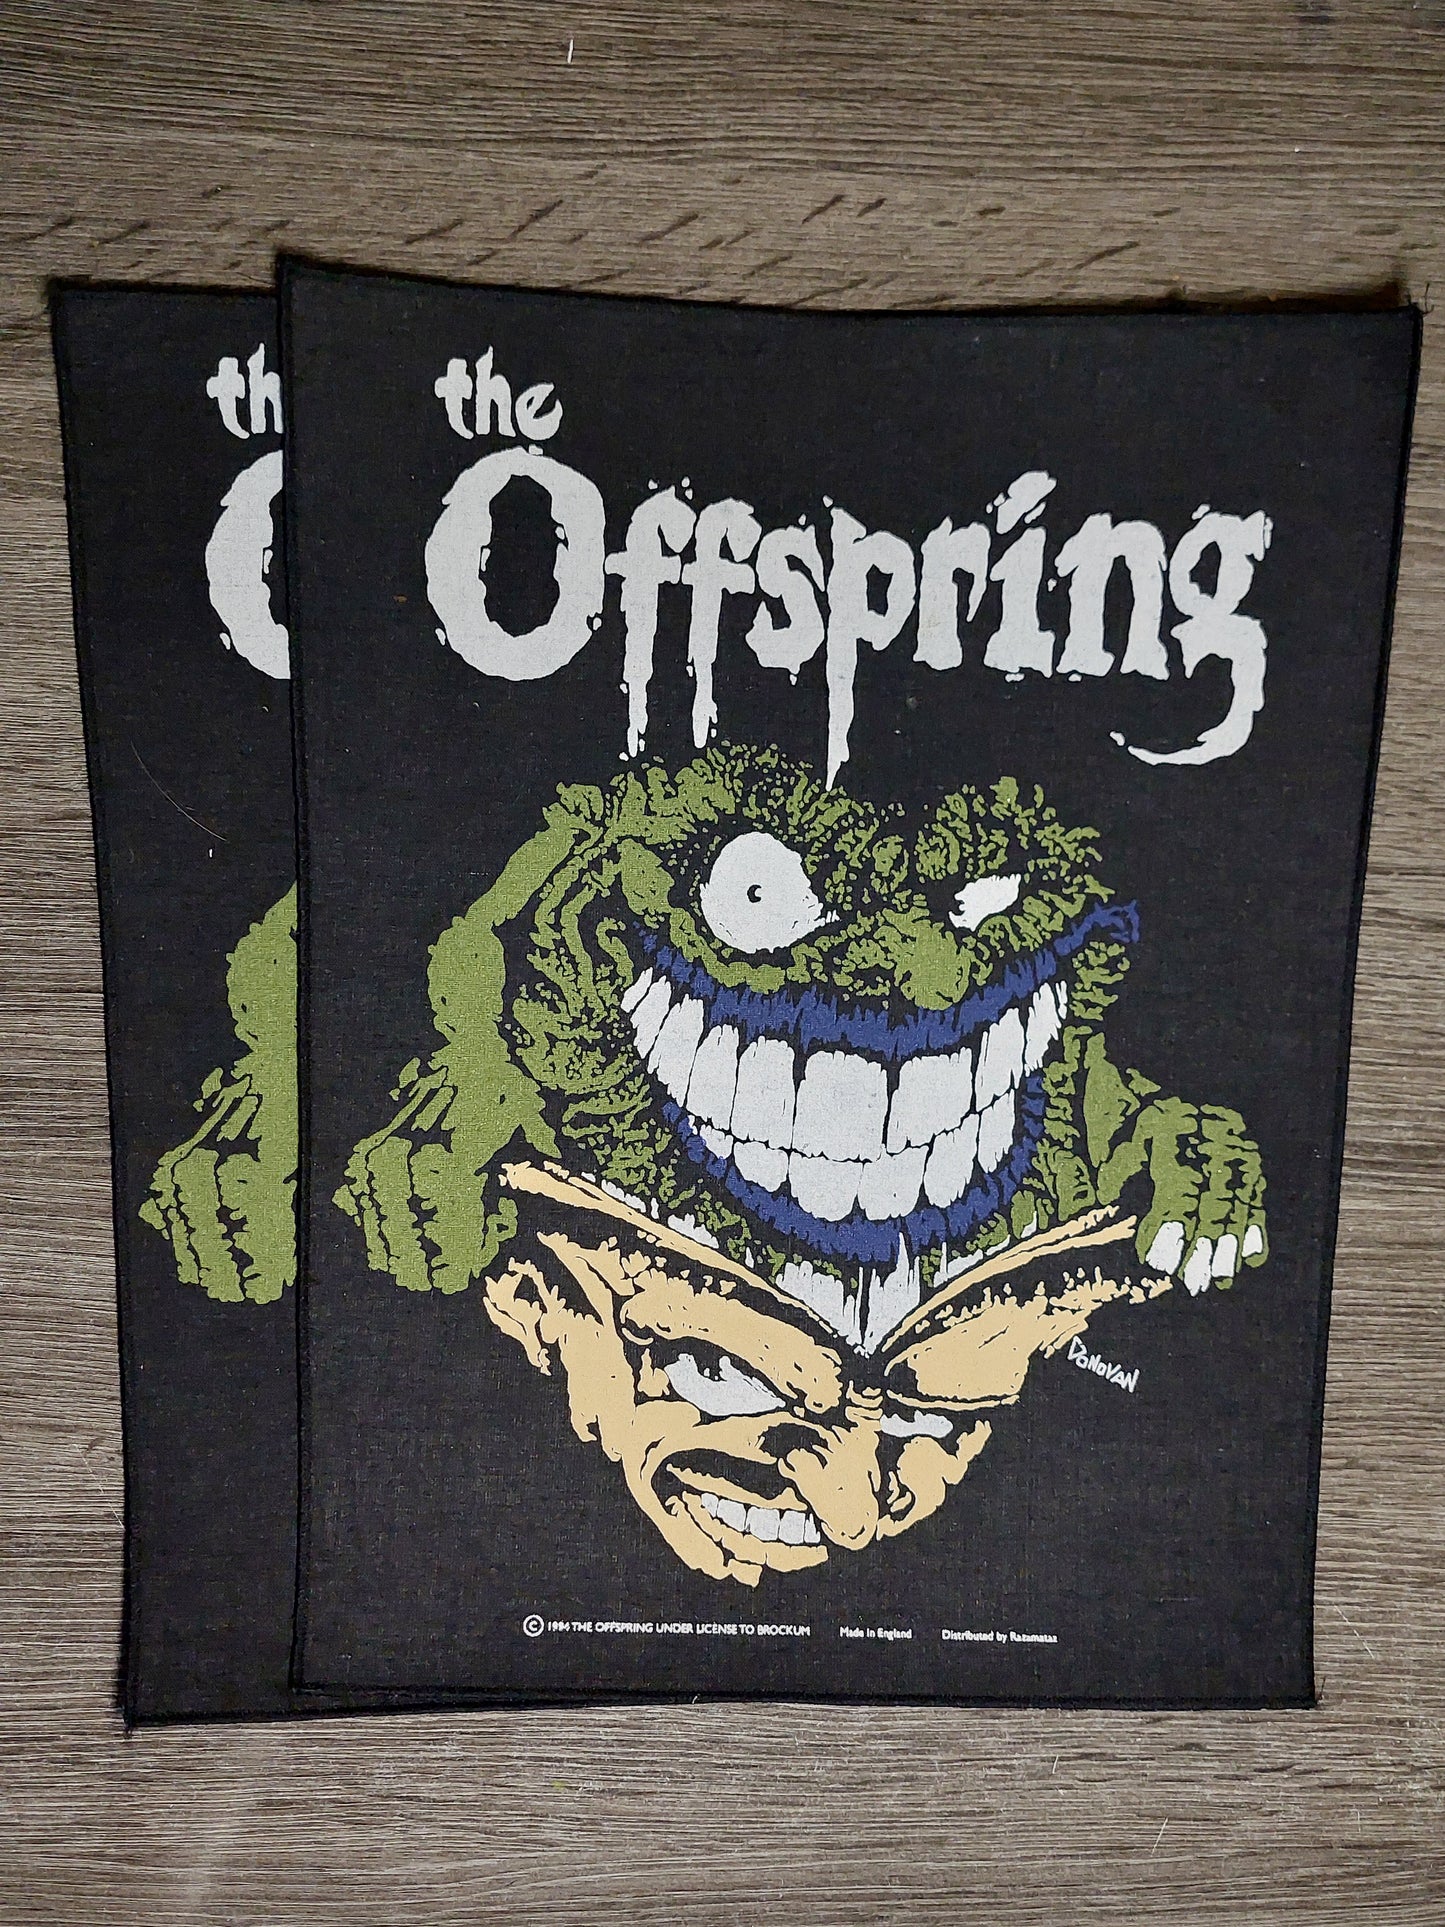 The Offspring - Monster brain backpatch